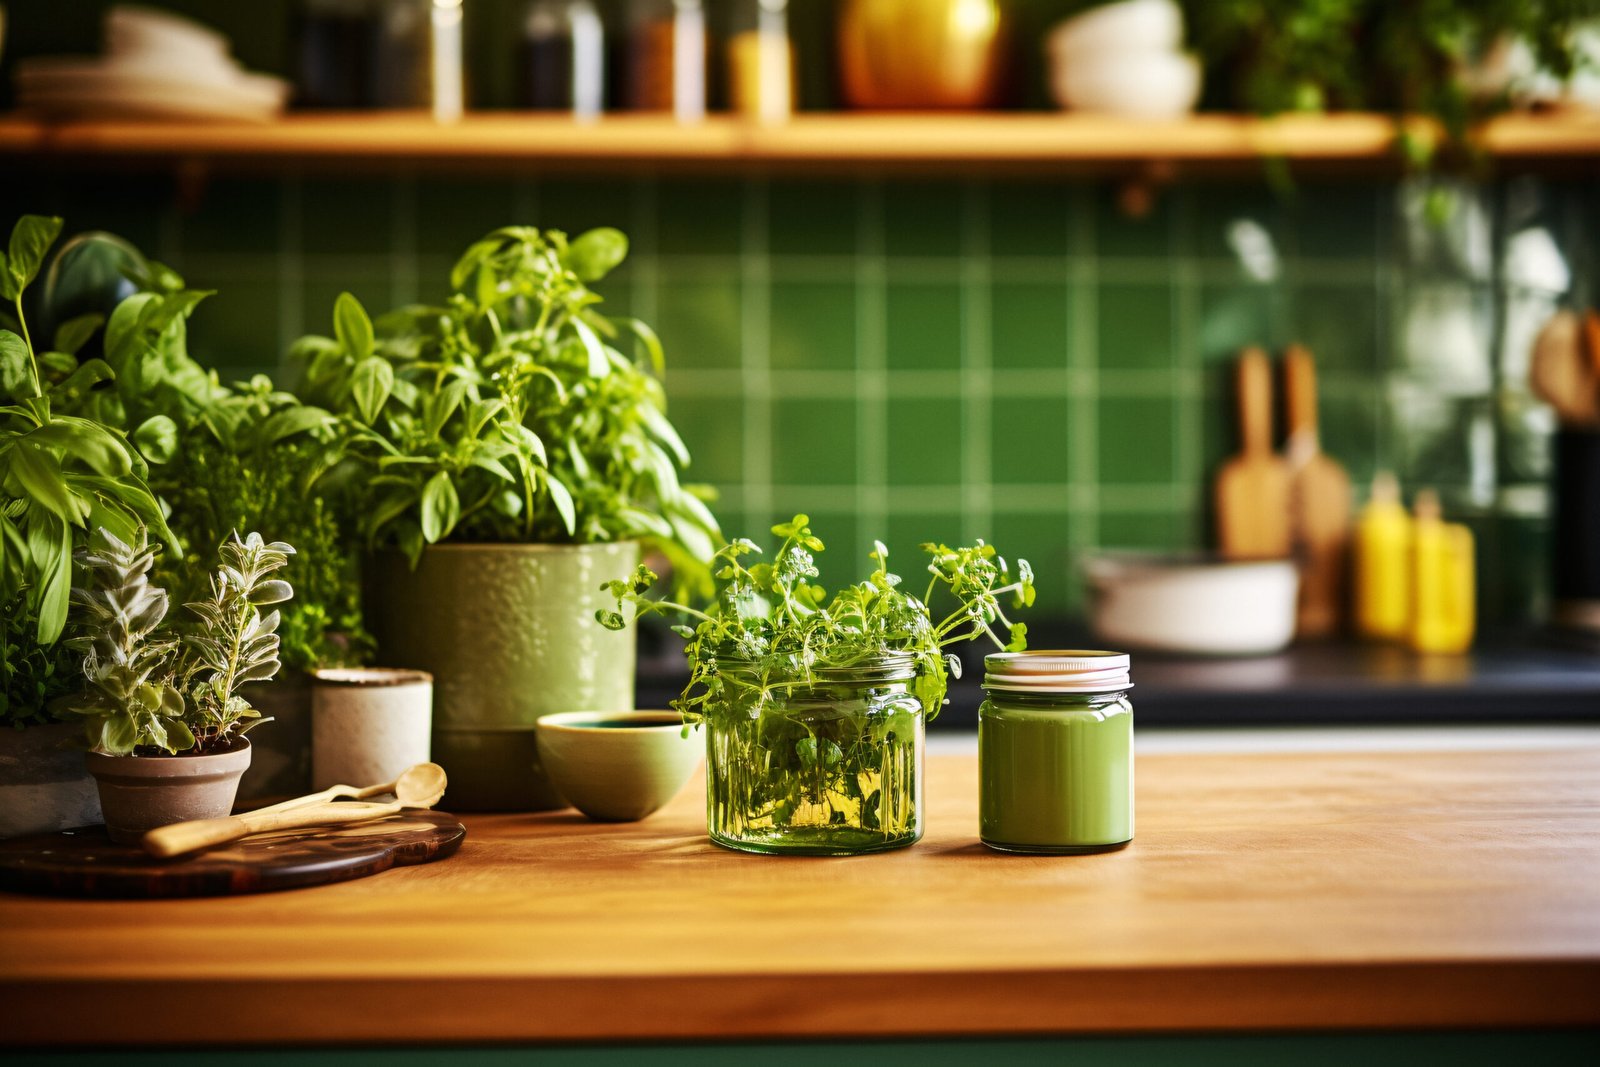 Beautifully arranged potted plants on the kitchen counter.